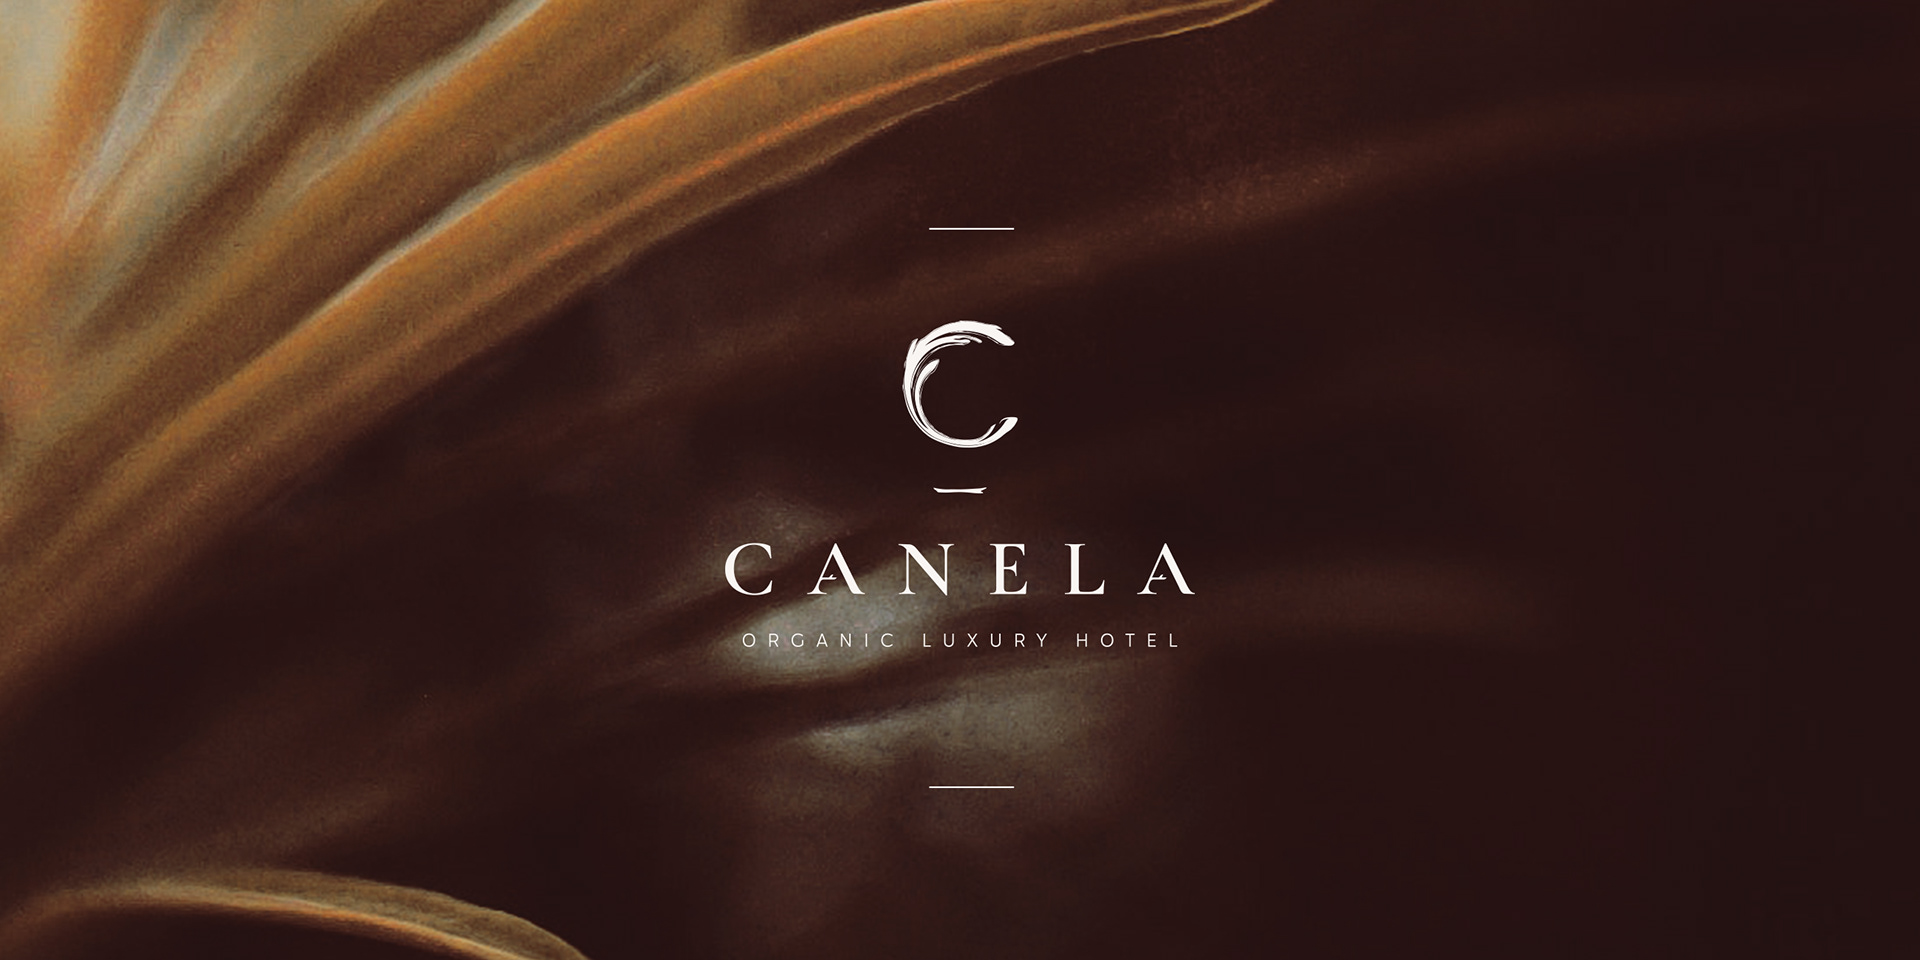 Selecta Branding Studio Create Brand Identity and Art Direction for Canela an Organic Luxury Hotel Luxury Architecture Project in Brazil